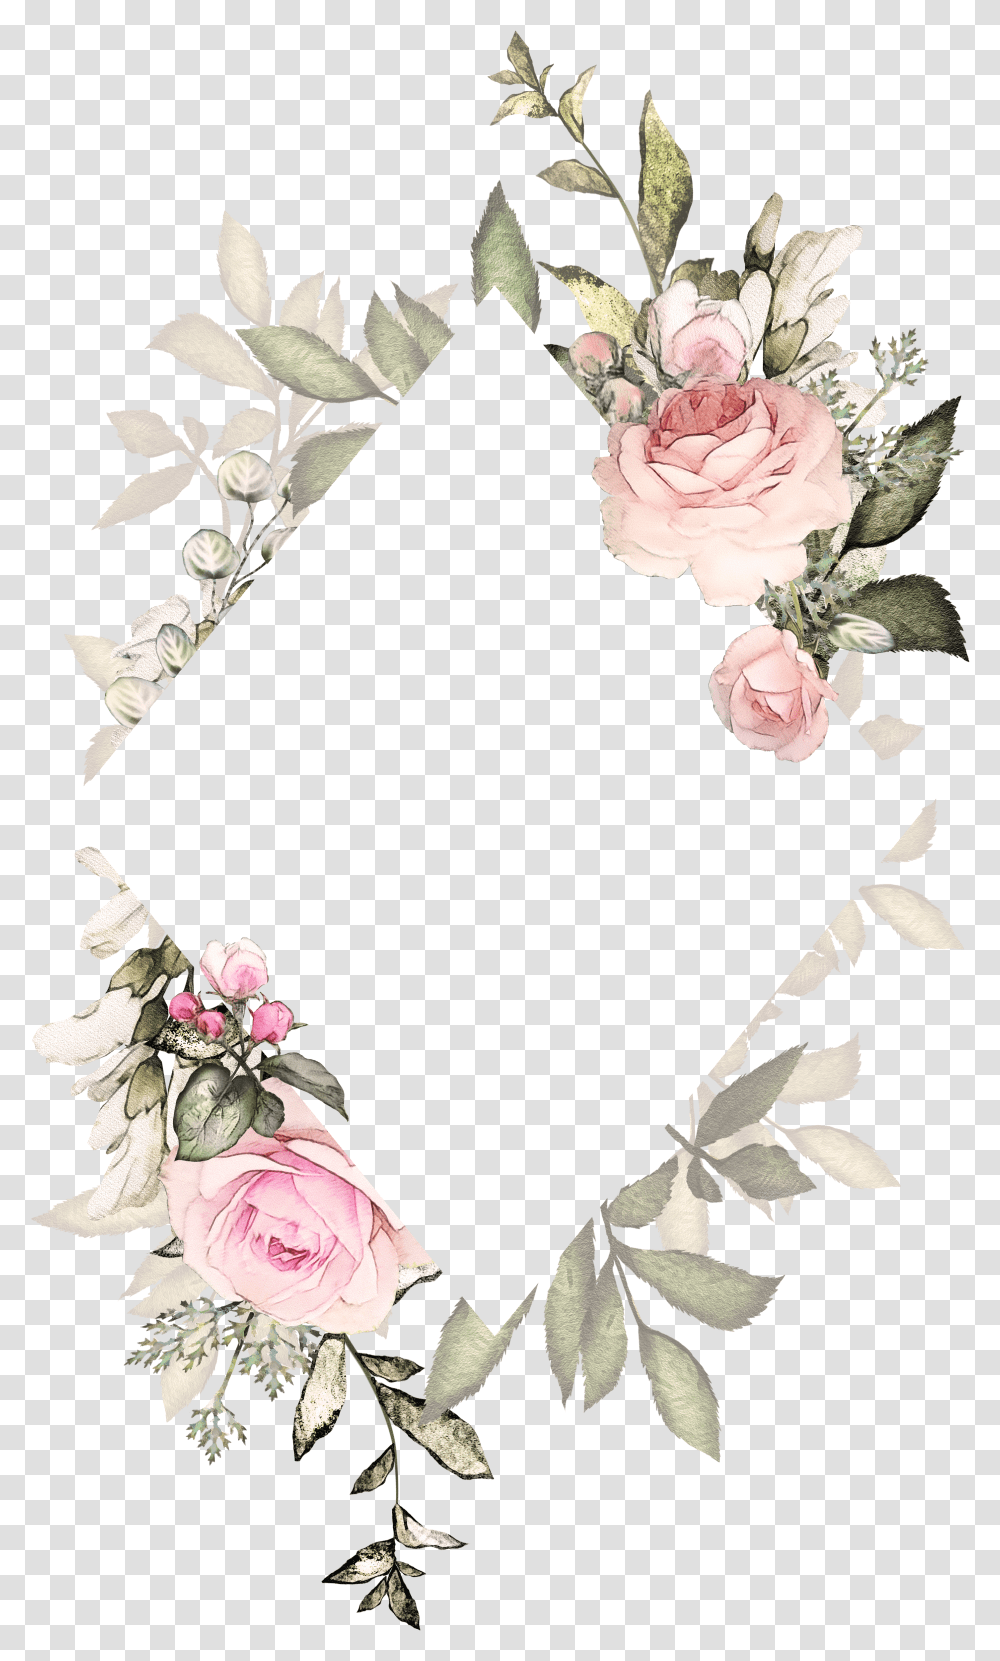 Painting Wallpaper Watercolor Background For Wedding Invitation Hd Transparent Png